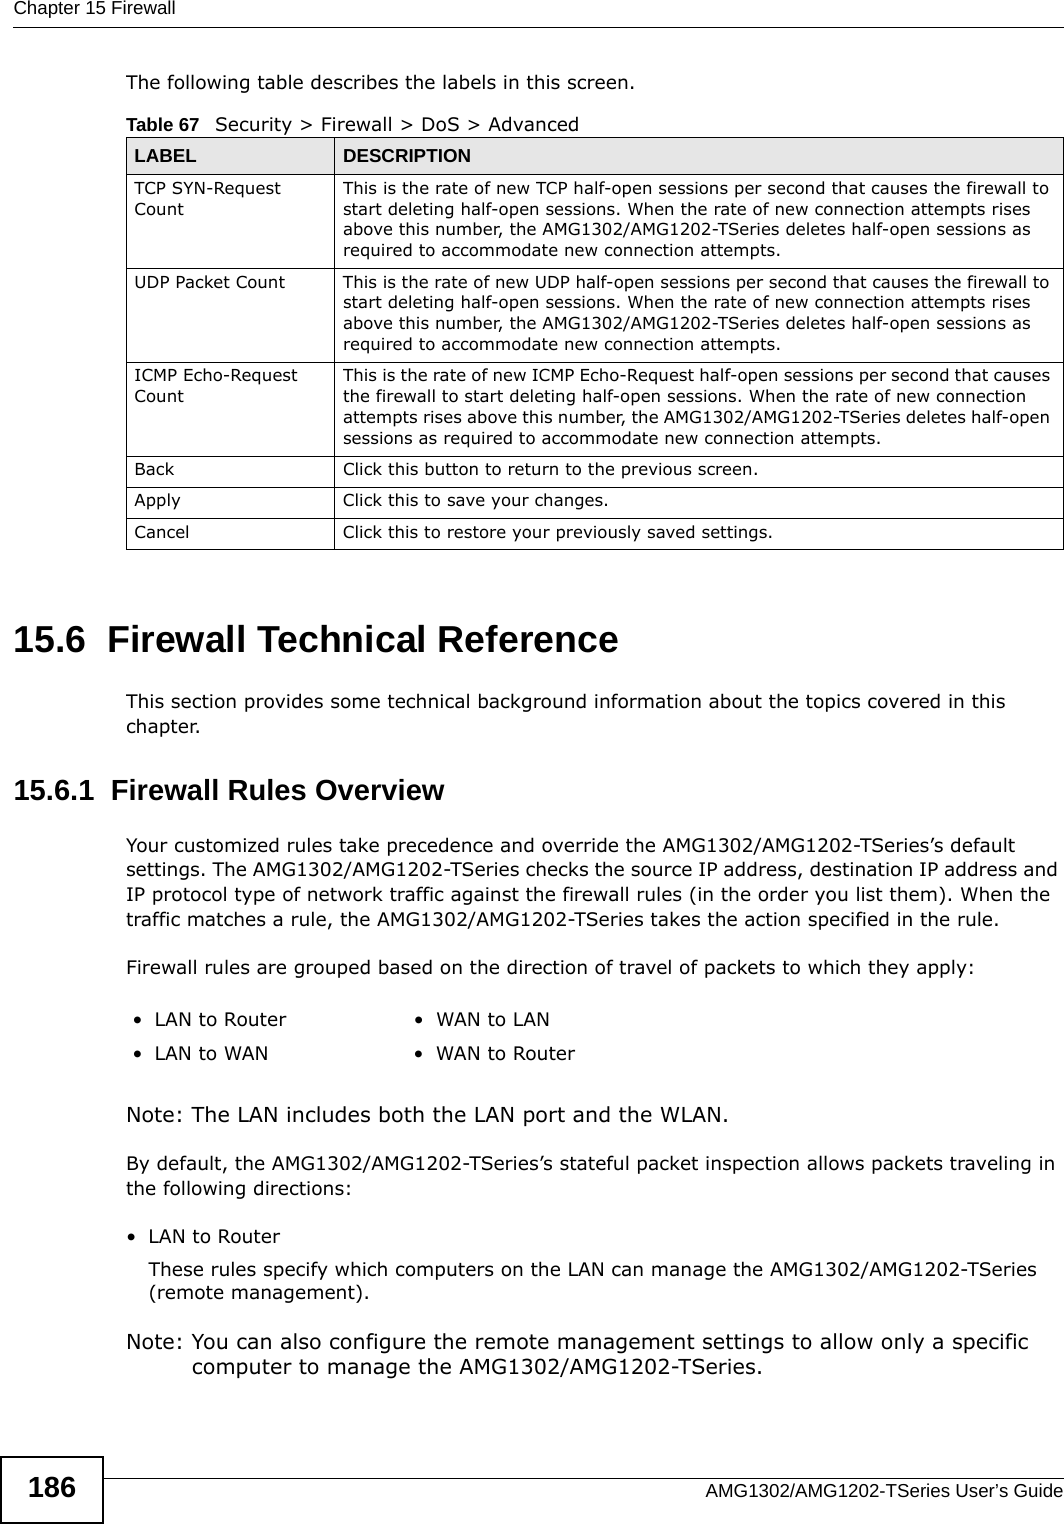 Chapter 15 FirewallAMG1302/AMG1202-TSeries User’s Guide186The following table describes the labels in this screen.15.6  Firewall Technical ReferenceThis section provides some technical background information about the topics covered in this chapter.15.6.1  Firewall Rules OverviewYour customized rules take precedence and override the AMG1302/AMG1202-TSeries’s default settings. The AMG1302/AMG1202-TSeries checks the source IP address, destination IP address and IP protocol type of network traffic against the firewall rules (in the order you list them). When the traffic matches a rule, the AMG1302/AMG1202-TSeries takes the action specified in the rule. Firewall rules are grouped based on the direction of travel of packets to which they apply: Note: The LAN includes both the LAN port and the WLAN.By default, the AMG1302/AMG1202-TSeries’s stateful packet inspection allows packets traveling in the following directions:•LAN to Router These rules specify which computers on the LAN can manage the AMG1302/AMG1202-TSeries (remote management). Note: You can also configure the remote management settings to allow only a specific computer to manage the AMG1302/AMG1202-TSeries.Table 67   Security &gt; Firewall &gt; DoS &gt; AdvancedLABEL DESCRIPTIONTCP SYN-Request CountThis is the rate of new TCP half-open sessions per second that causes the firewall to start deleting half-open sessions. When the rate of new connection attempts rises above this number, the AMG1302/AMG1202-TSeries deletes half-open sessions as required to accommodate new connection attempts.UDP Packet Count This is the rate of new UDP half-open sessions per second that causes the firewall to start deleting half-open sessions. When the rate of new connection attempts rises above this number, the AMG1302/AMG1202-TSeries deletes half-open sessions as required to accommodate new connection attempts.ICMP Echo-Request CountThis is the rate of new ICMP Echo-Request half-open sessions per second that causes the firewall to start deleting half-open sessions. When the rate of new connection attempts rises above this number, the AMG1302/AMG1202-TSeries deletes half-open sessions as required to accommodate new connection attempts.Back Click this button to return to the previous screen.Apply Click this to save your changes.Cancel Click this to restore your previously saved settings.•LAN to Router •WAN to LAN• LAN to WAN • WAN to Router